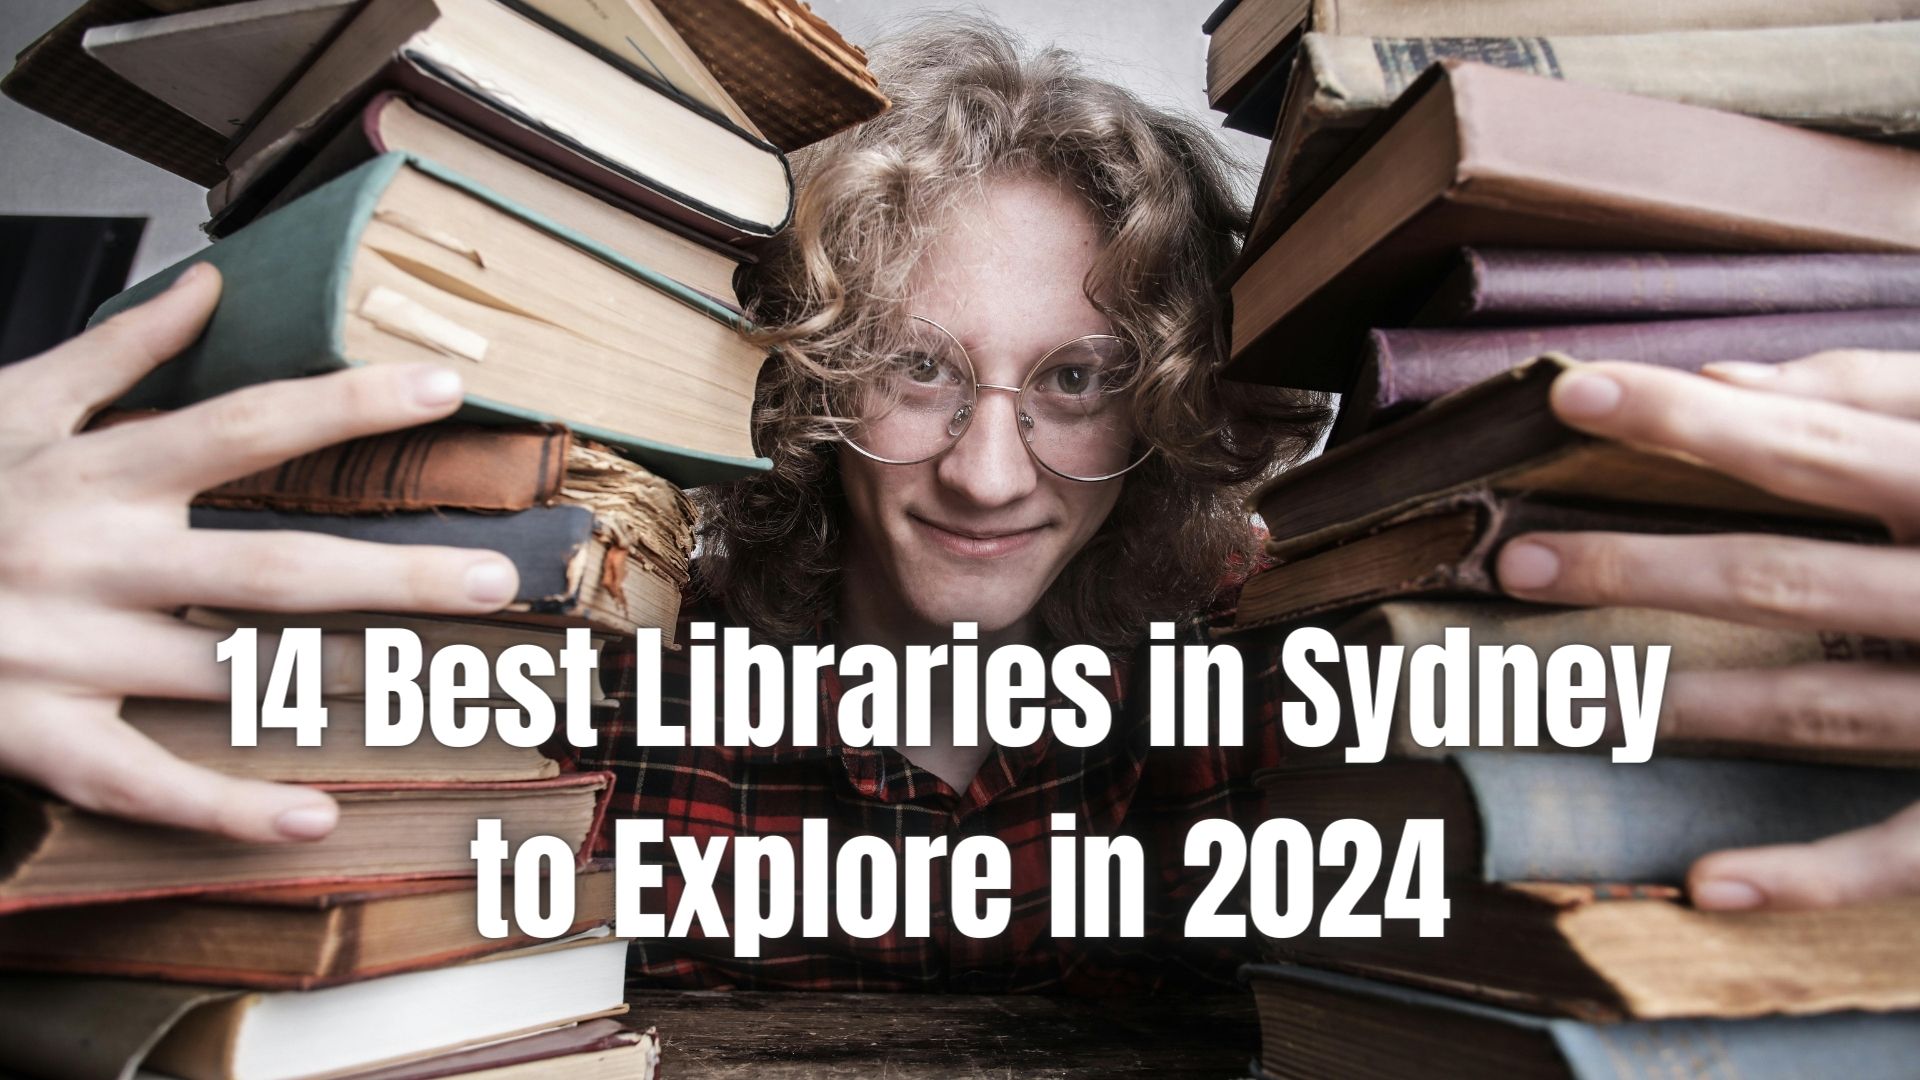 Explore the 14 best libraries in Sydney in 2024, featuring unique collections, modern facilities, and serene reading areas.